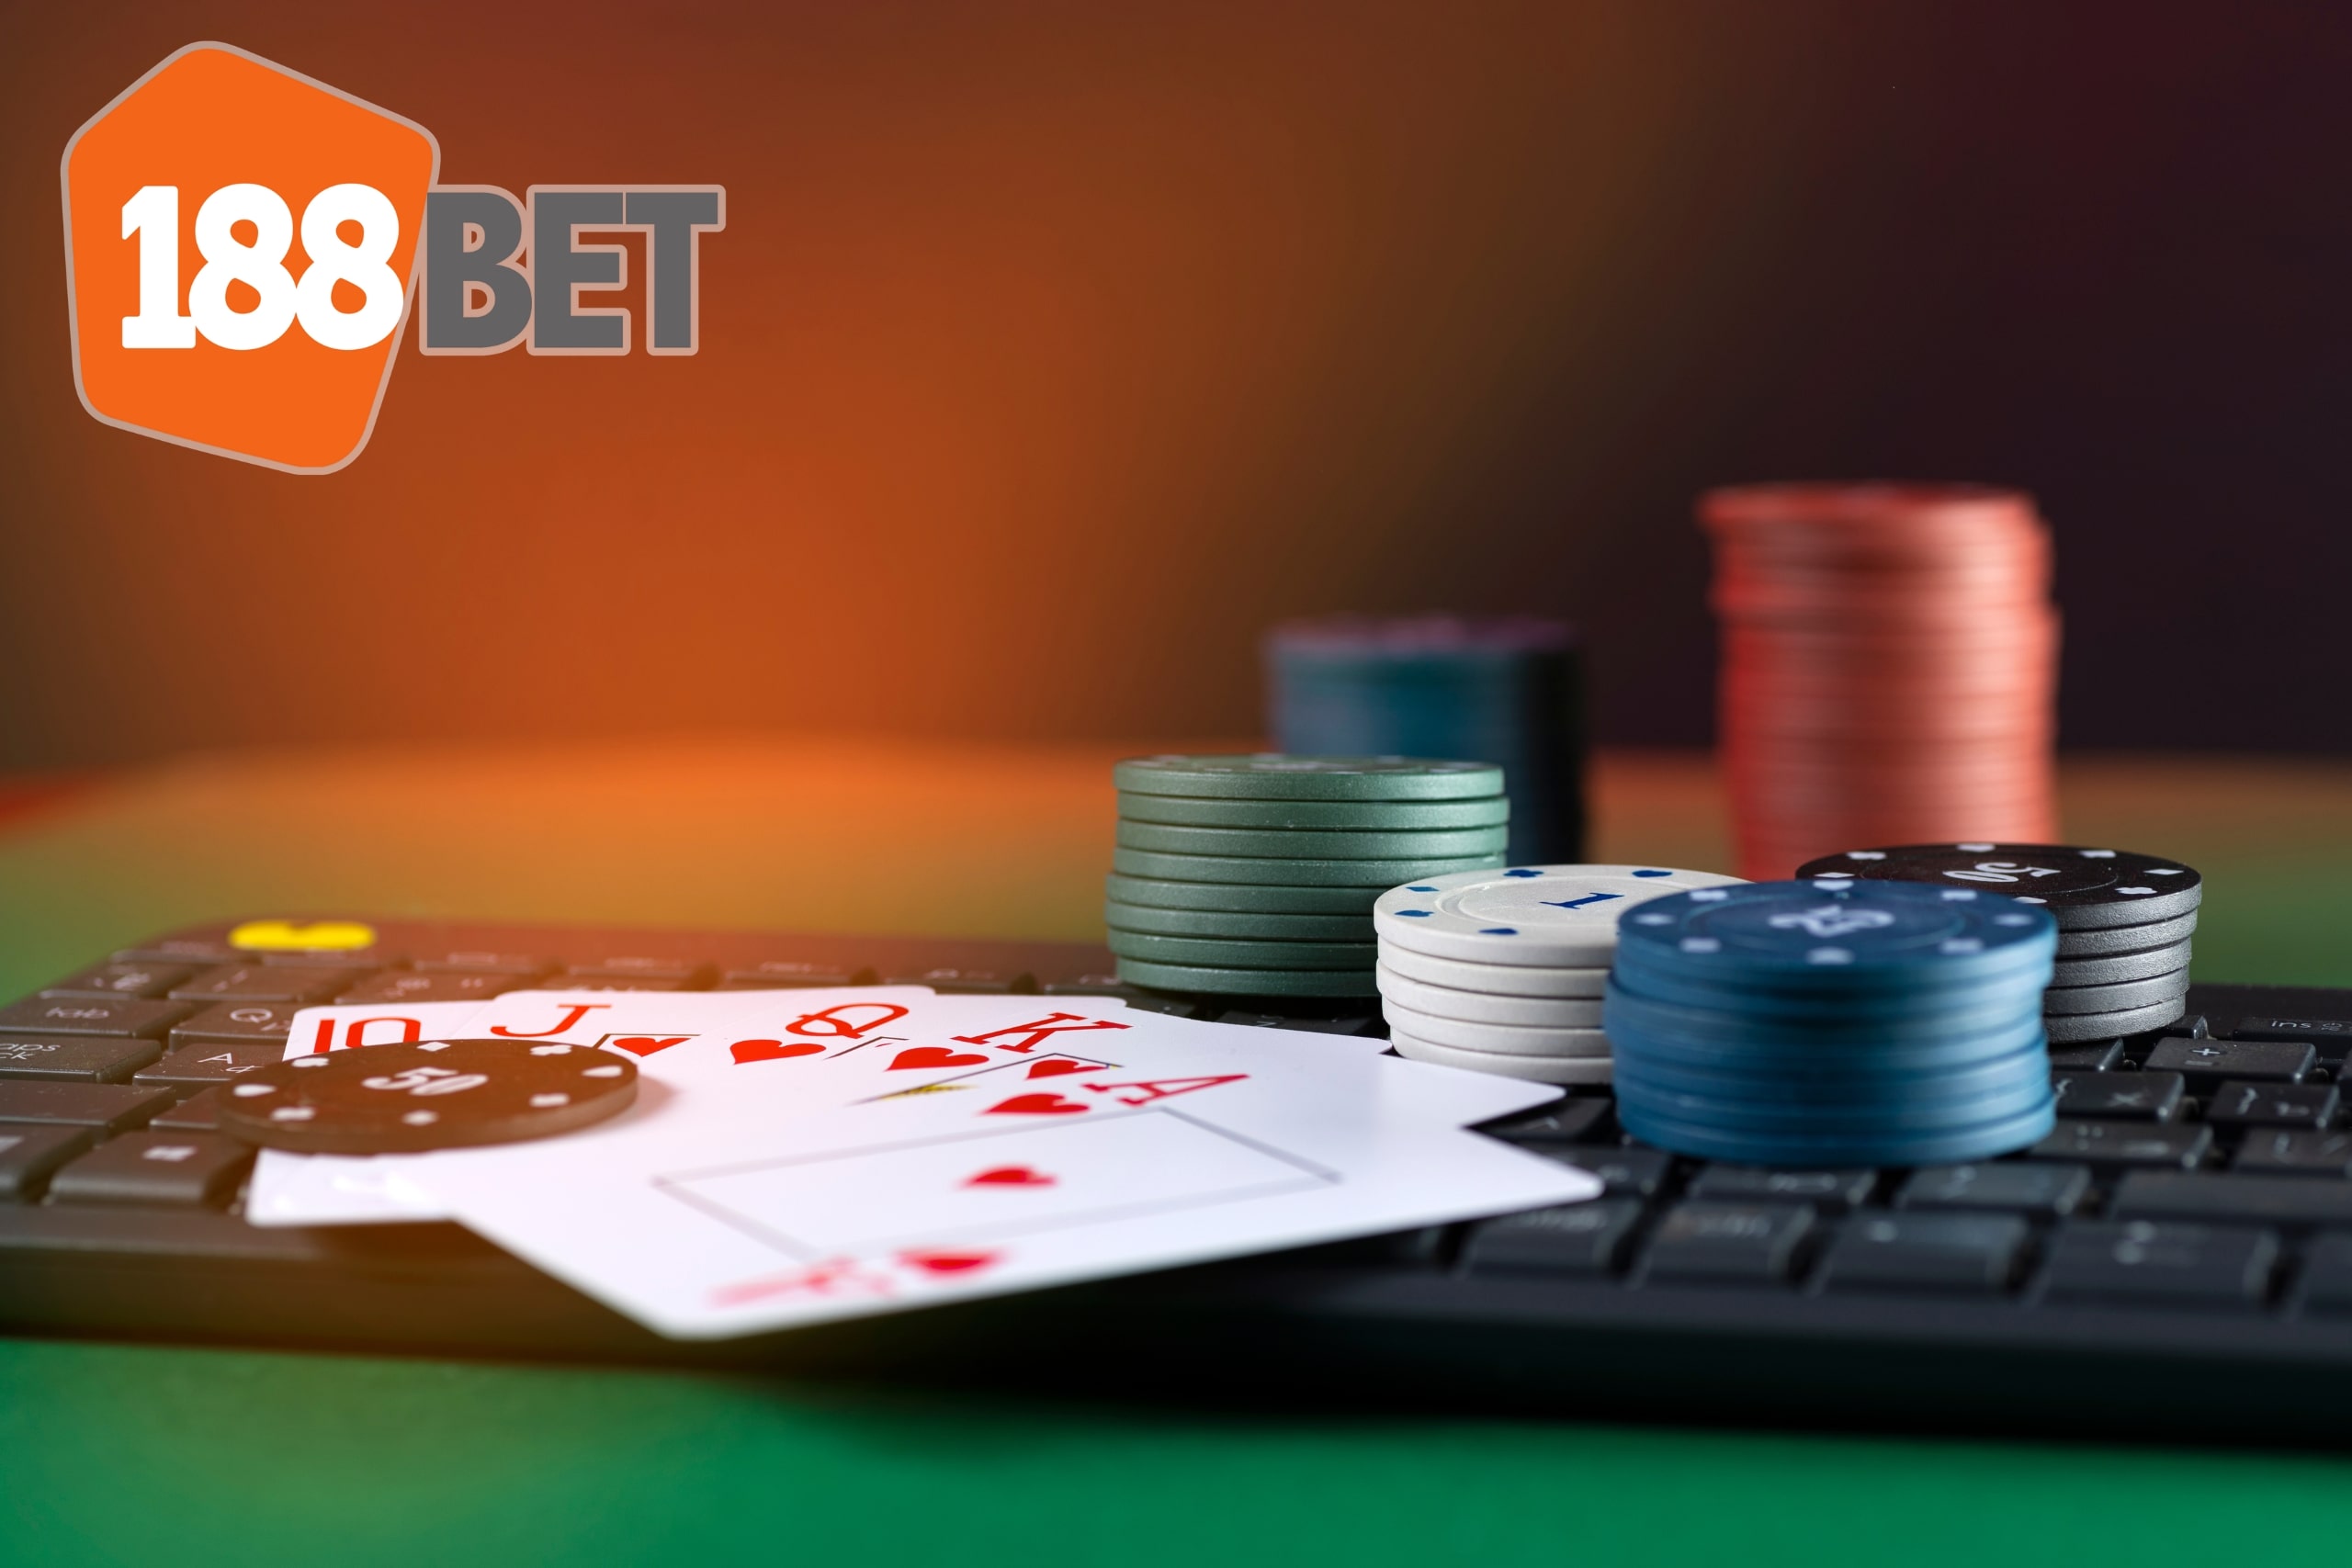 Experience Casino Gaming With 188Bet On iOS: Play Your Favorites Anywhere